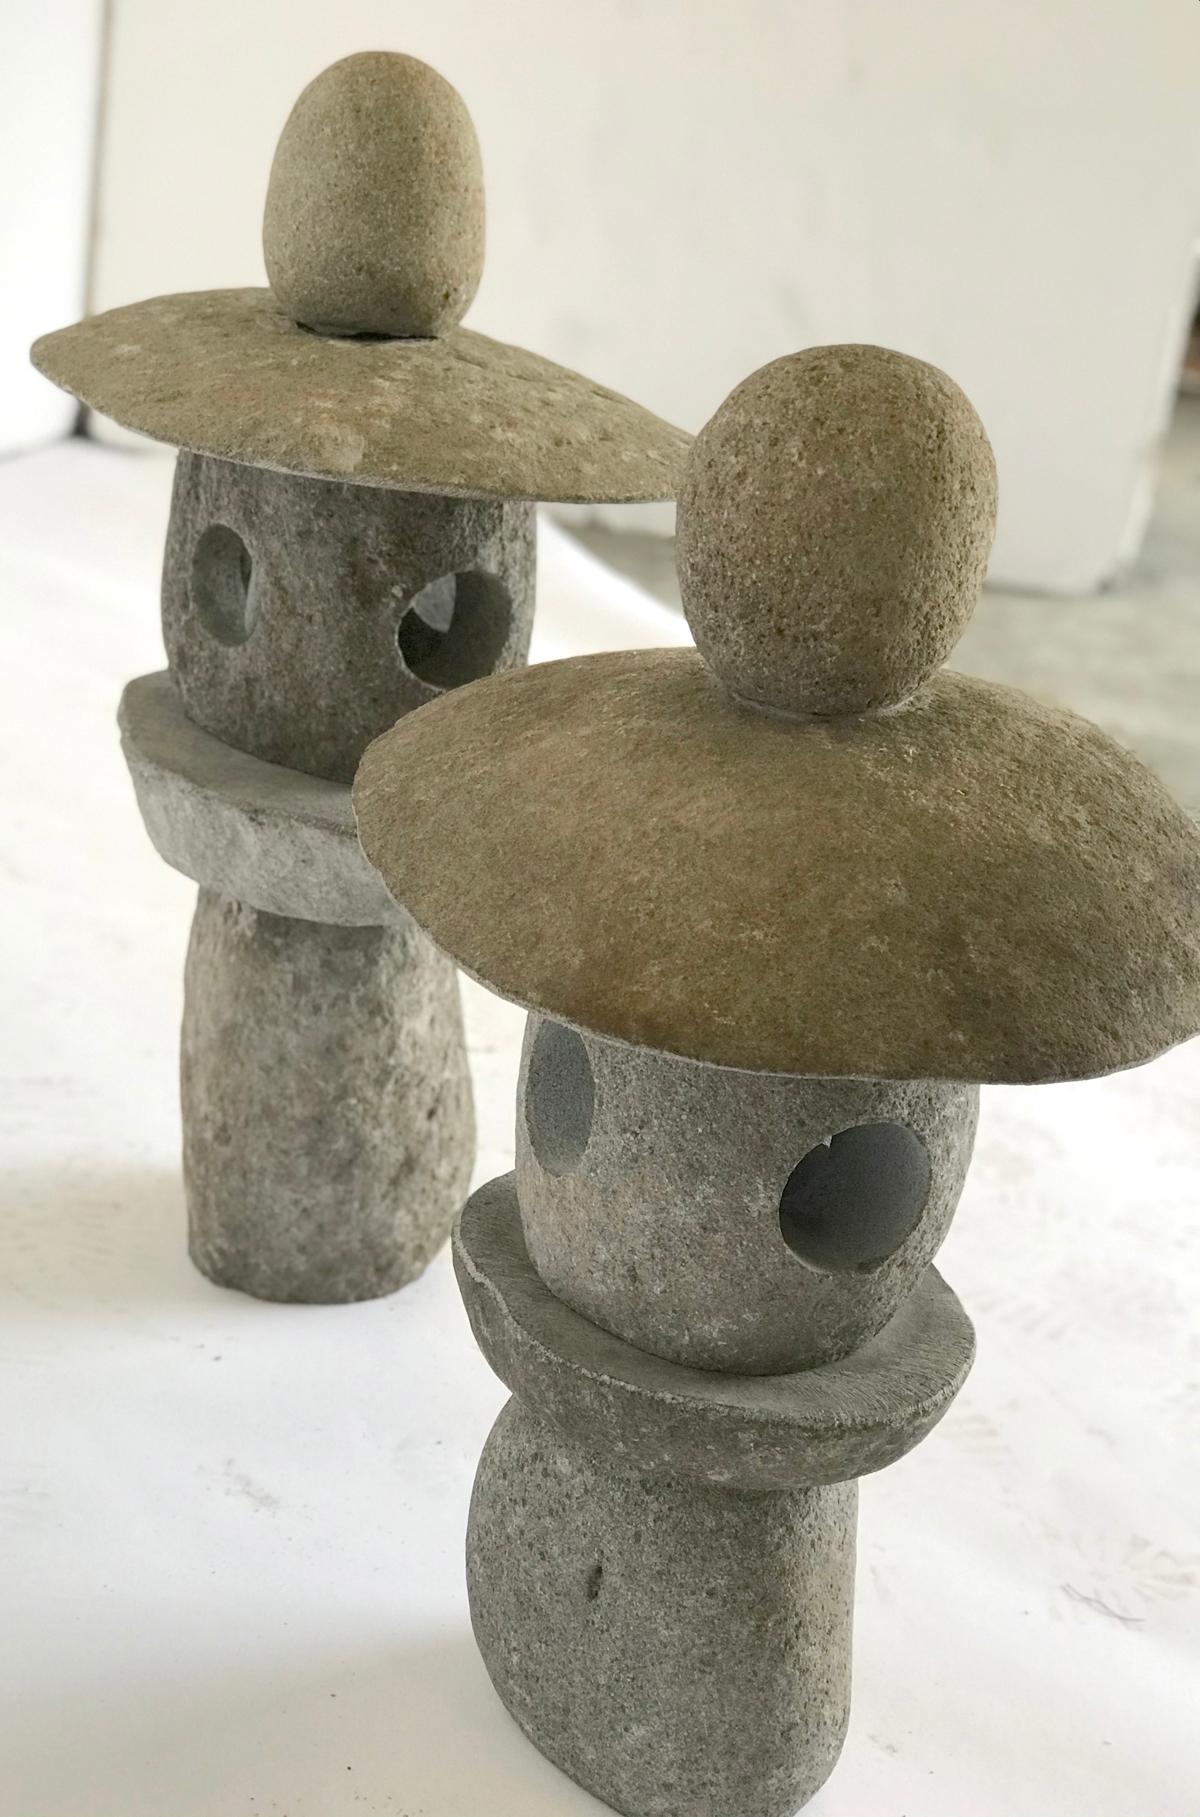 RIGHT ONE AVAILABLE. 21st century carved stone lantern made in the Japanese style.  It consists of 5 pieces and measures 17 x 12.5 x 26.5 tall. Please refer to specificities one when ordering.